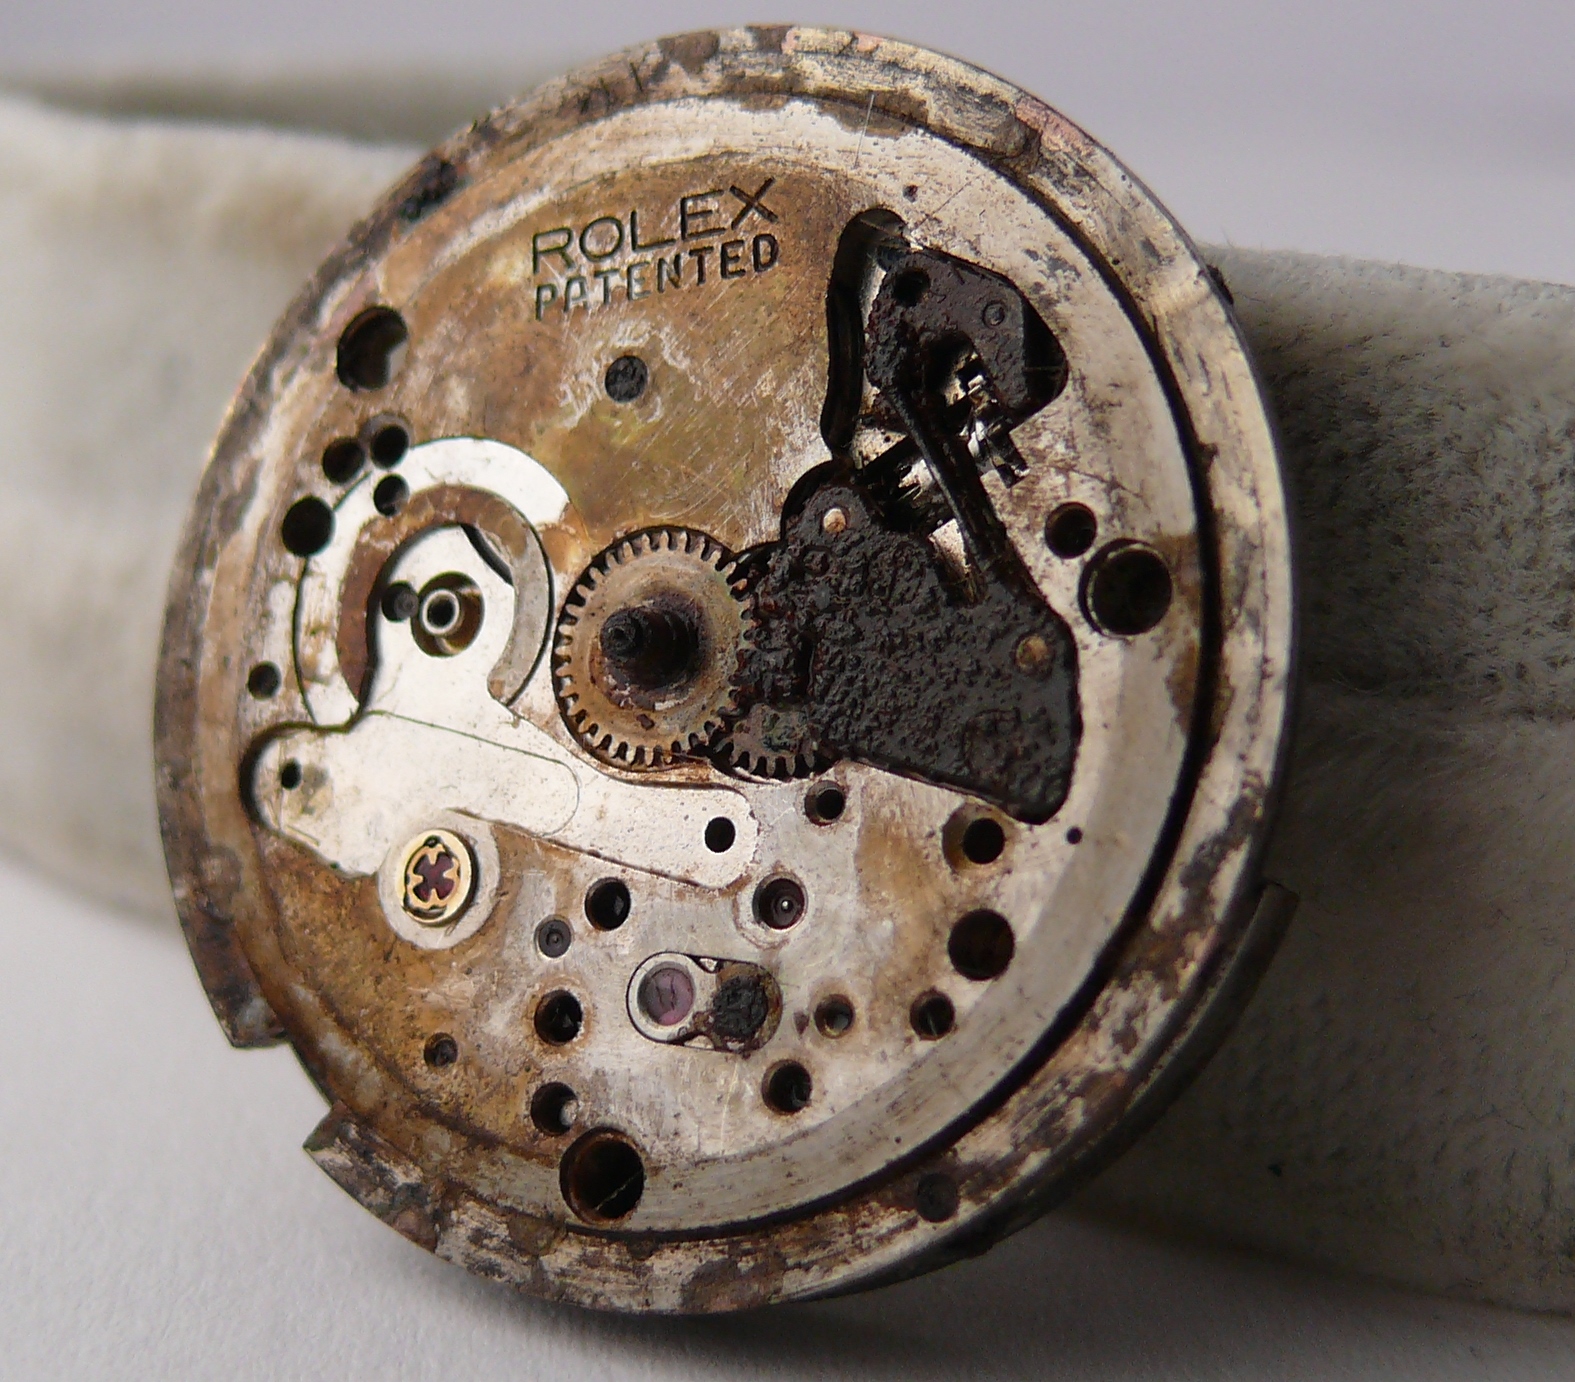 1950s Vintage Rolex Submariner 6538 Automatic Movement Caliber 1030 for Parts or projects Please - Image 6 of 6